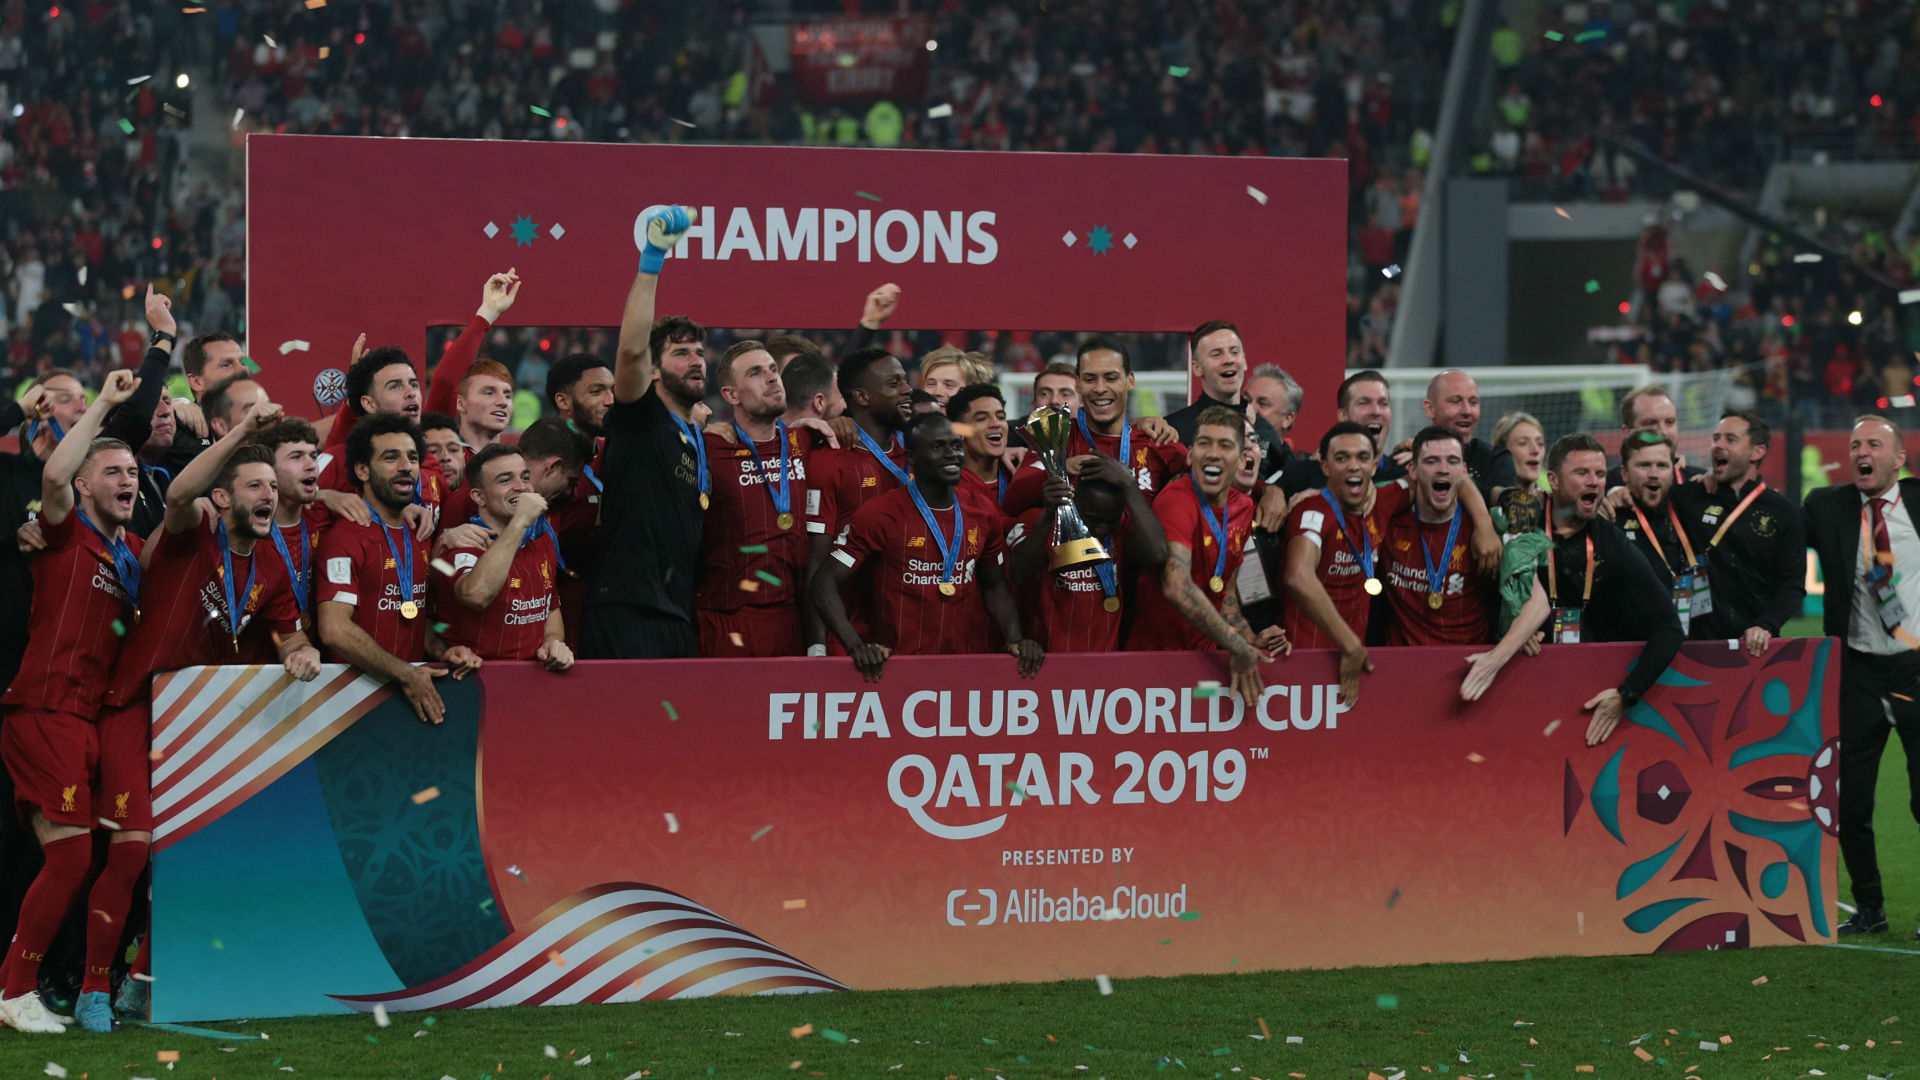 Qatar set to host Club World Cup in 2019 and 2020